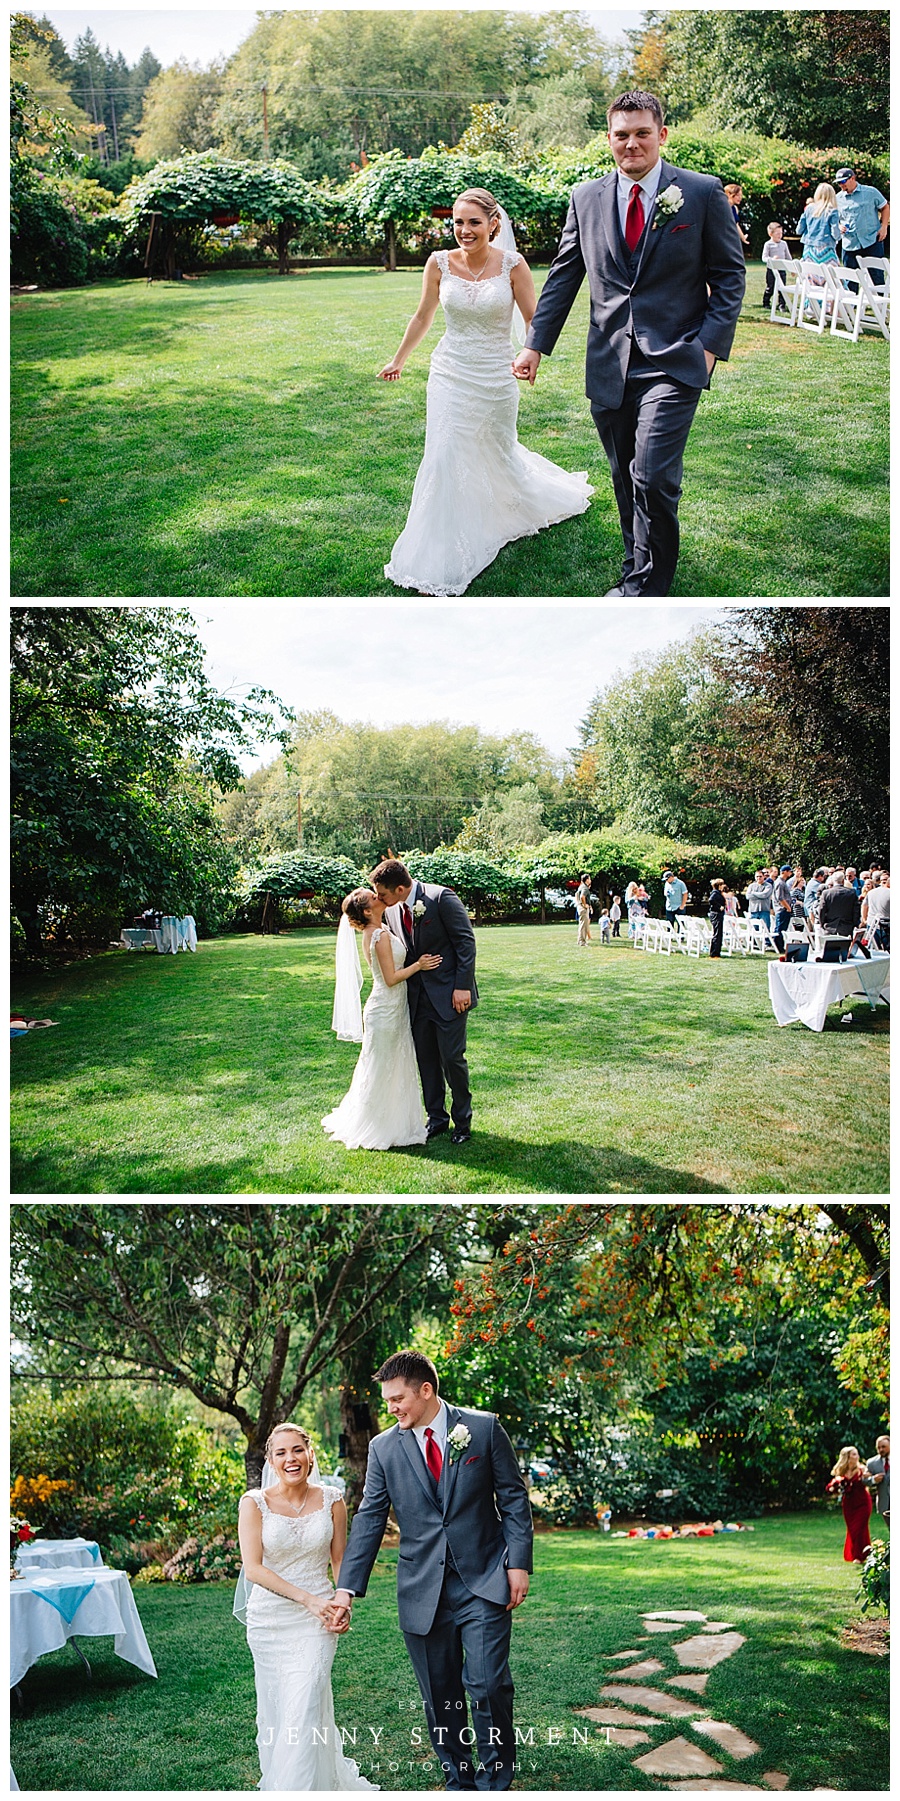 albees-garden-party-wedding-photos-by-jenny-storment-photography-67